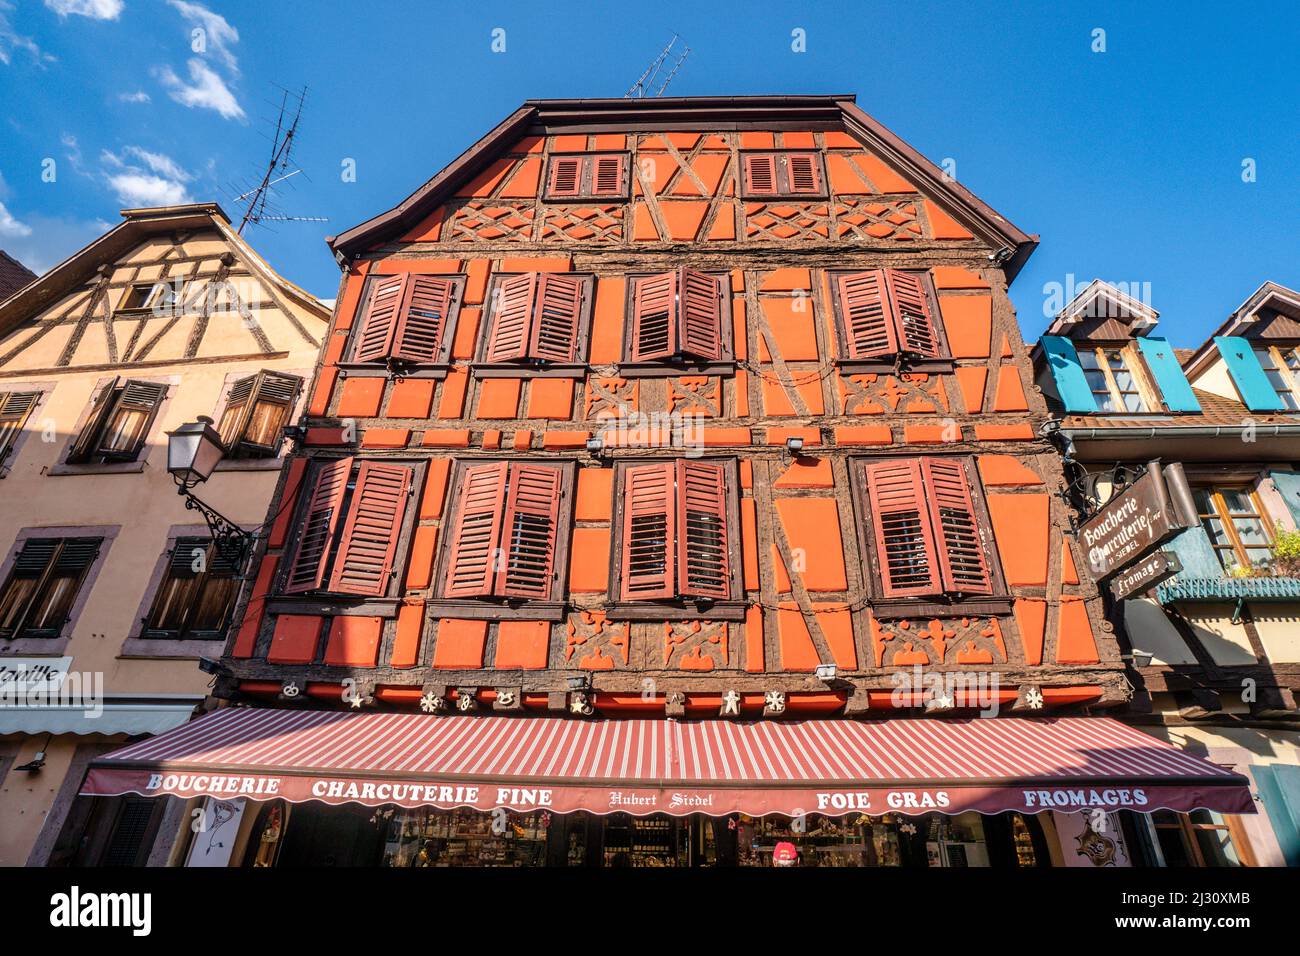 Old half-timbered house, Ribeauville, Alsace, France Stock Photo